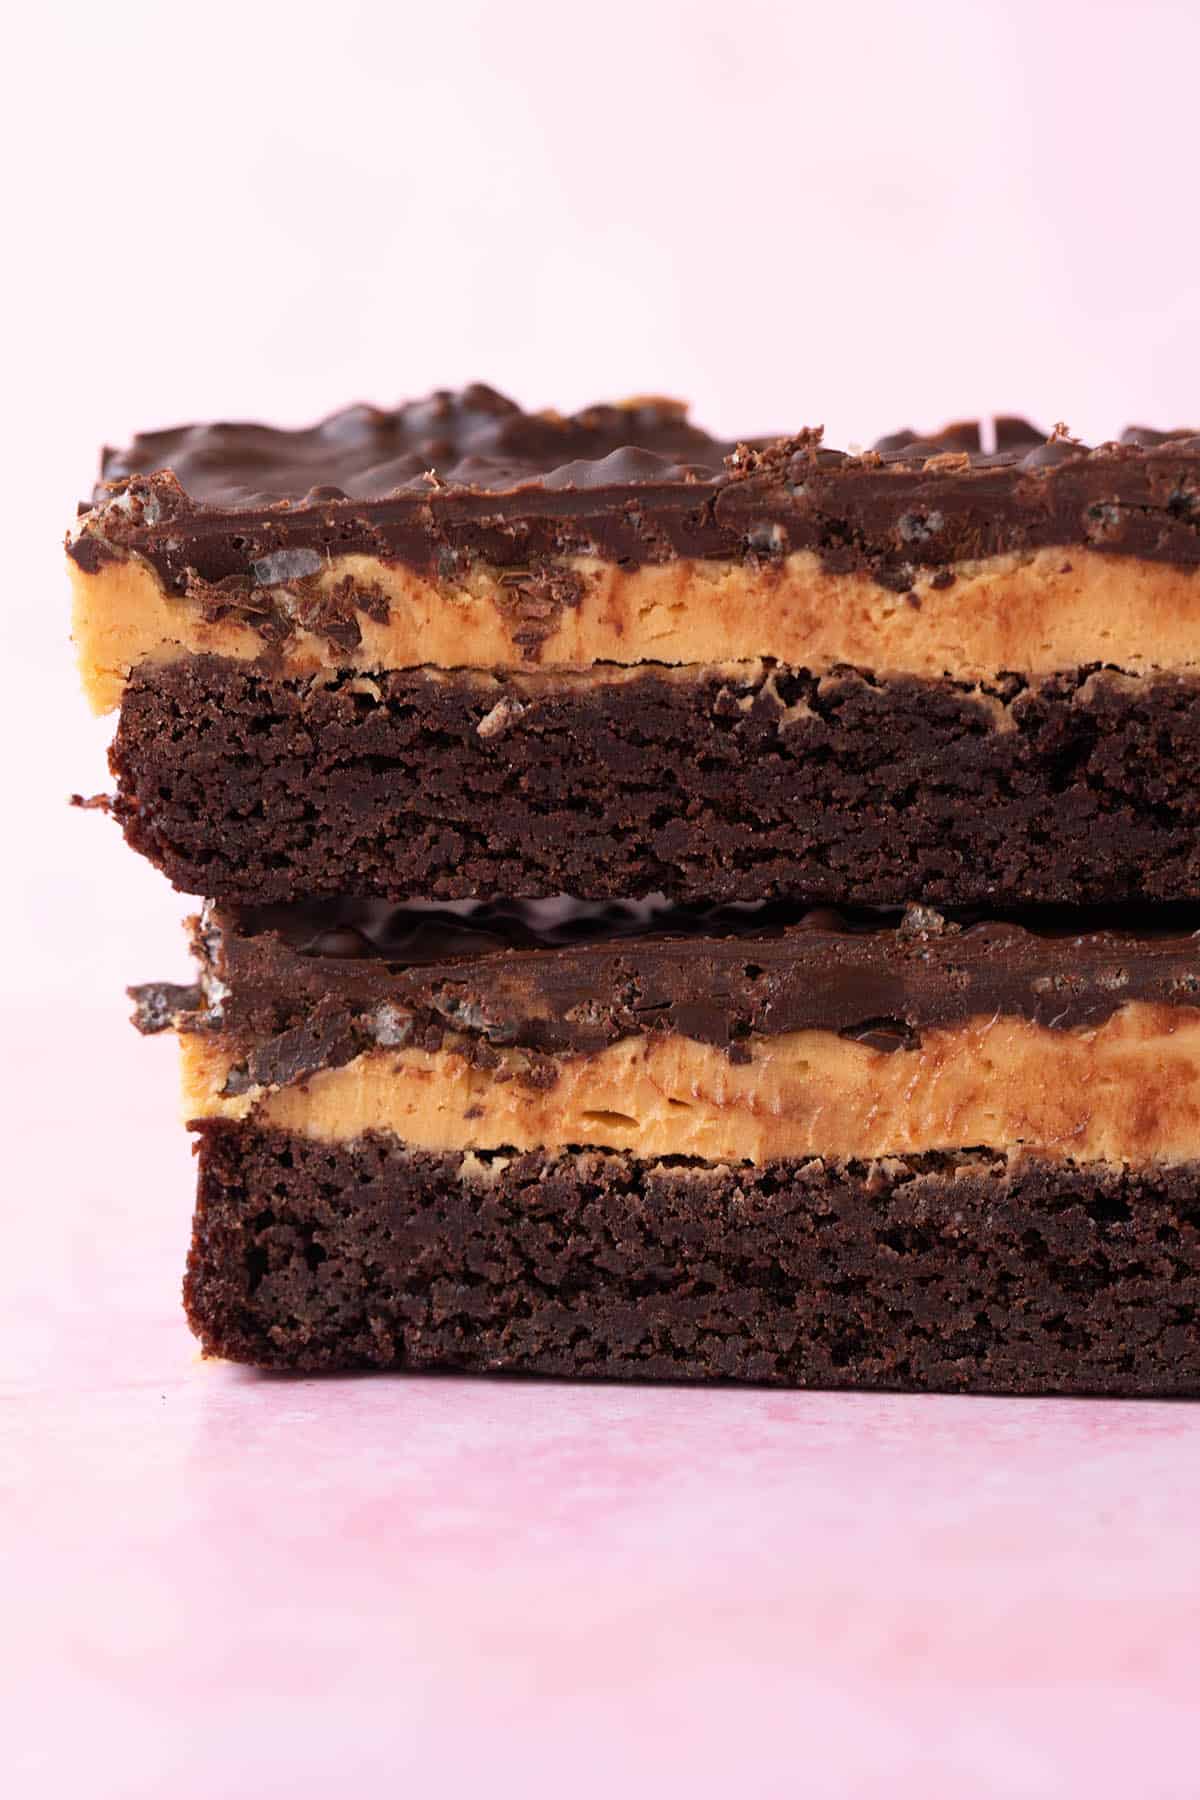 Close up showing three amazing layers of brownie on a pink background.